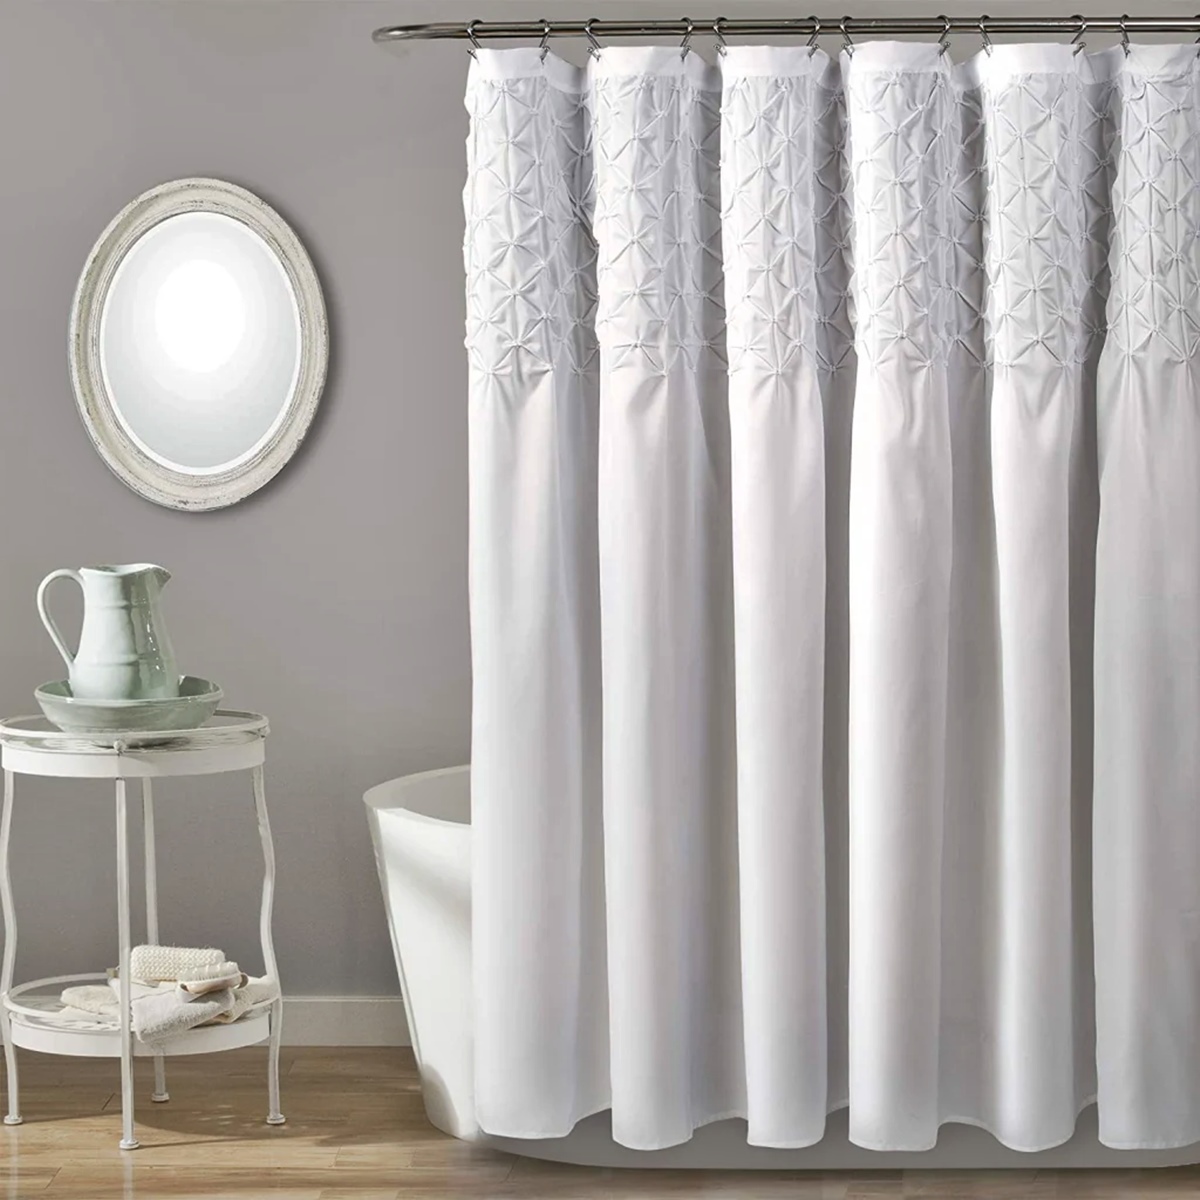 How To Make A Shower Curtain Look Good